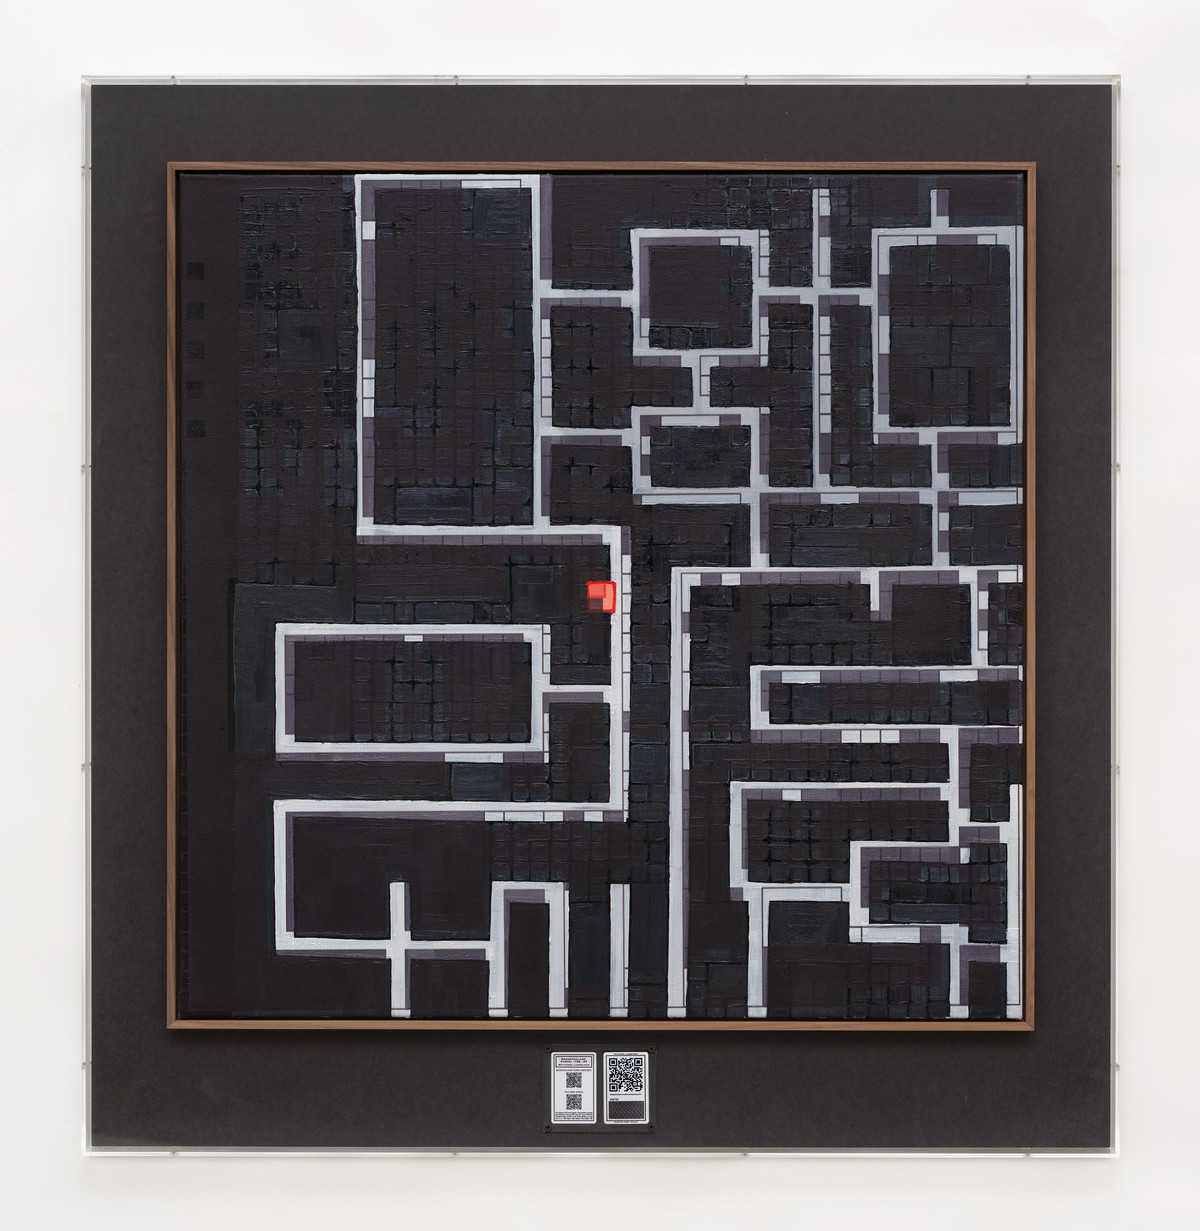 A square canvas painted black and showing a bird's eye map view of a plot of land on Decentraland